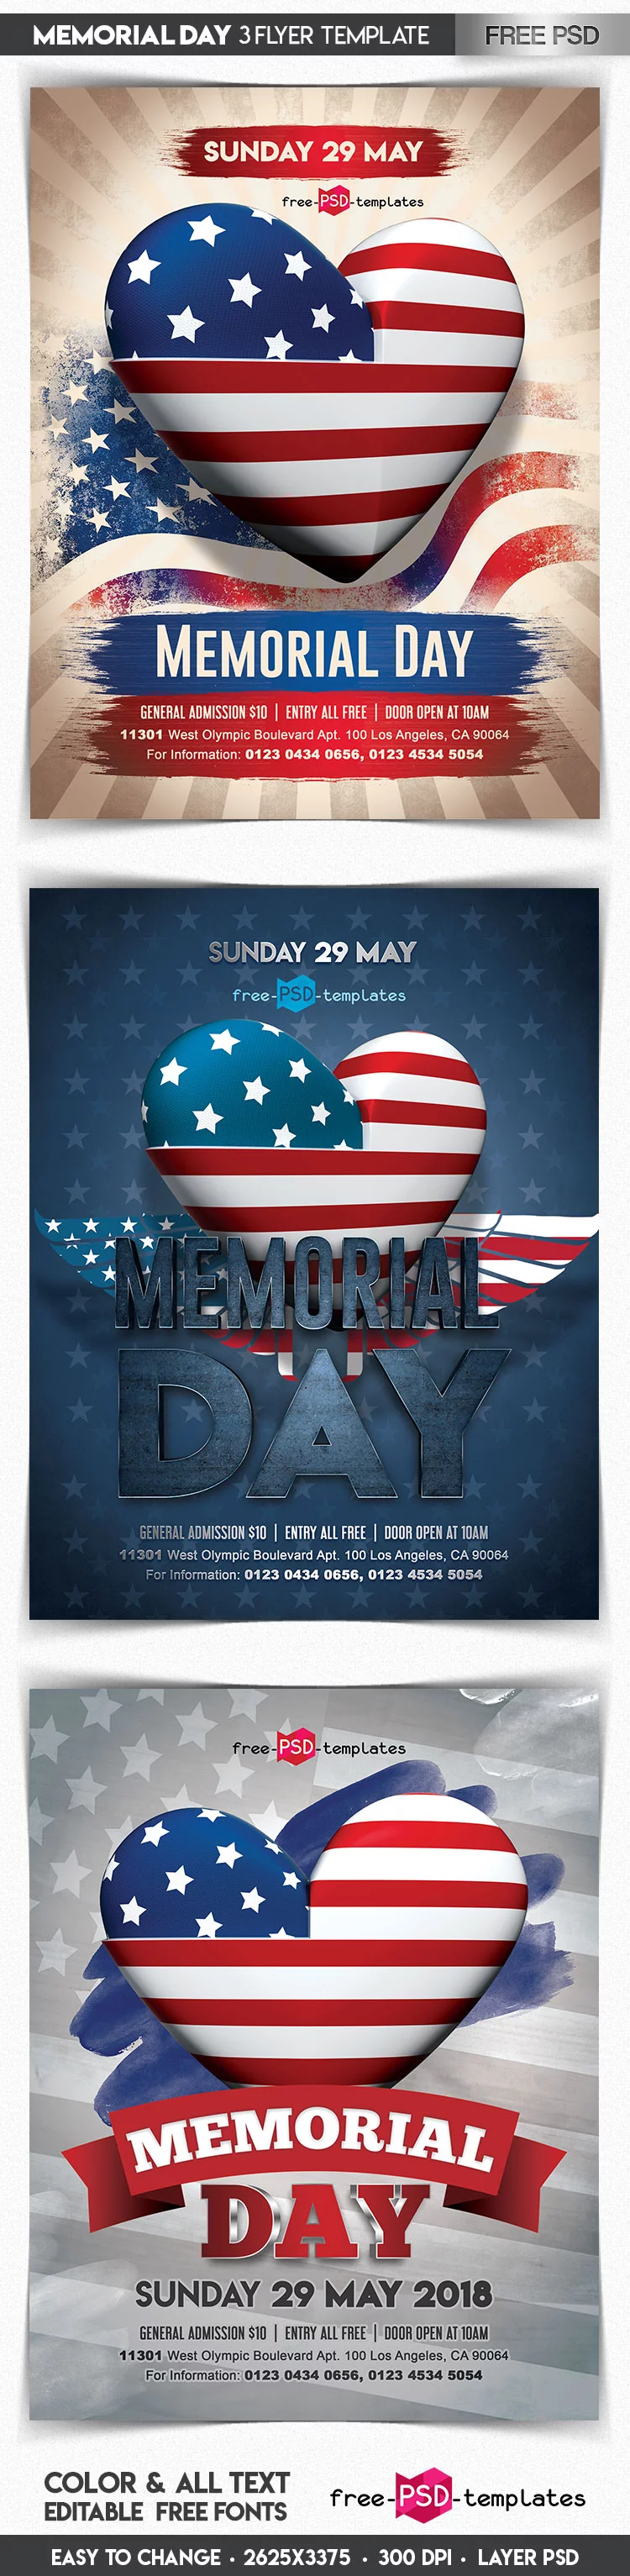 Free Memorial Day Flyer in PSD